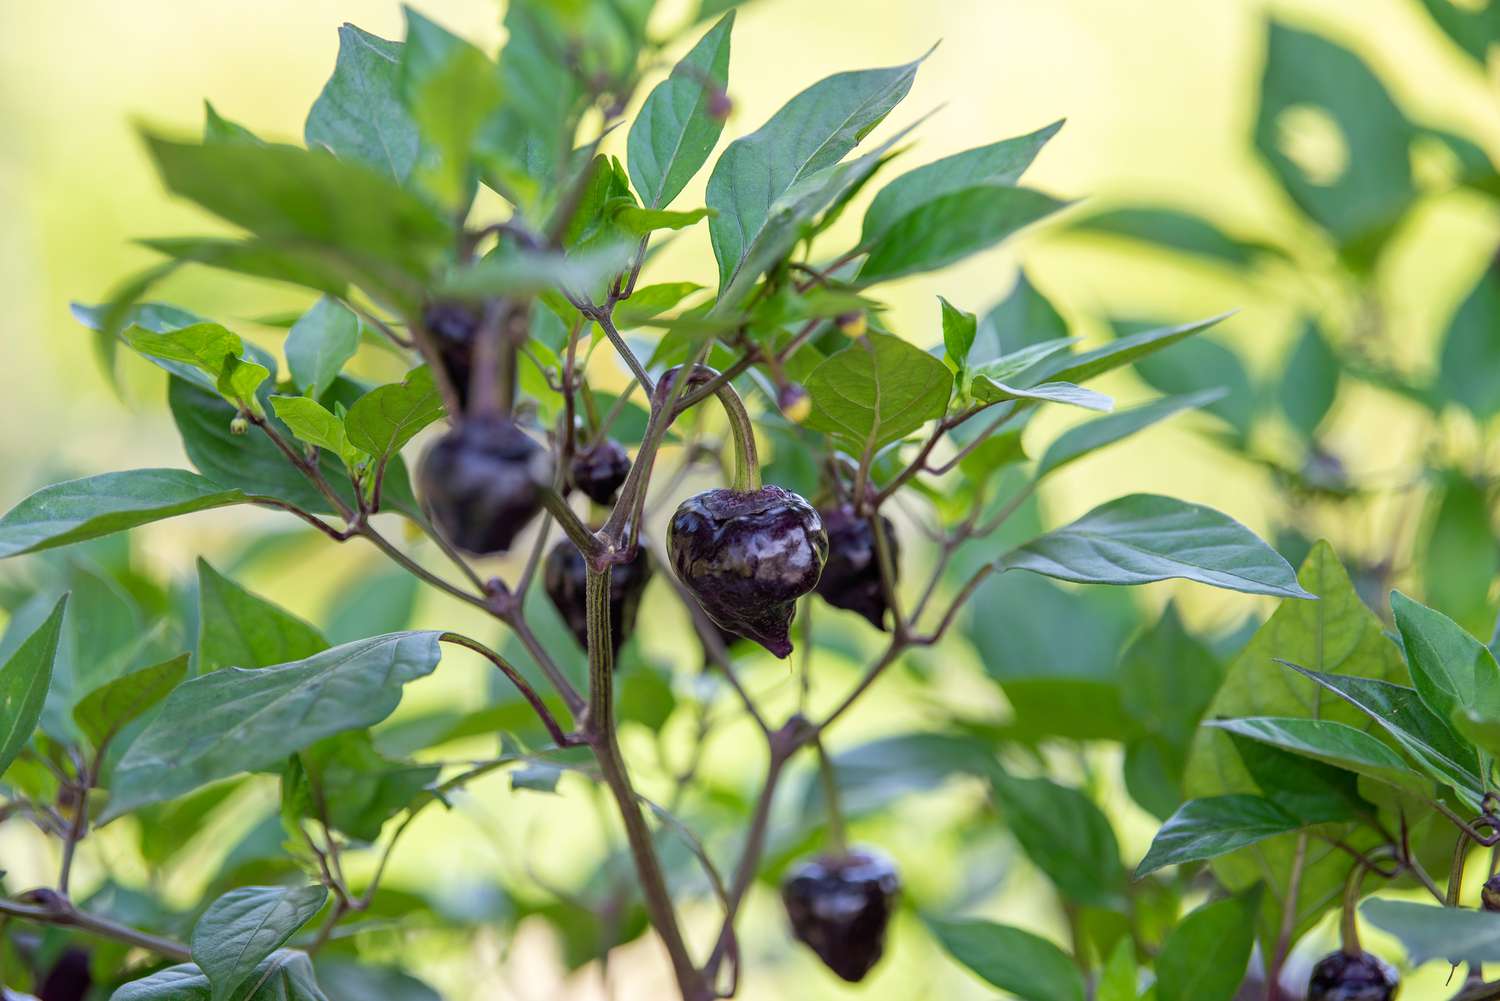 Ornamental pepper plant branches with rounded deep purple peppers hanging